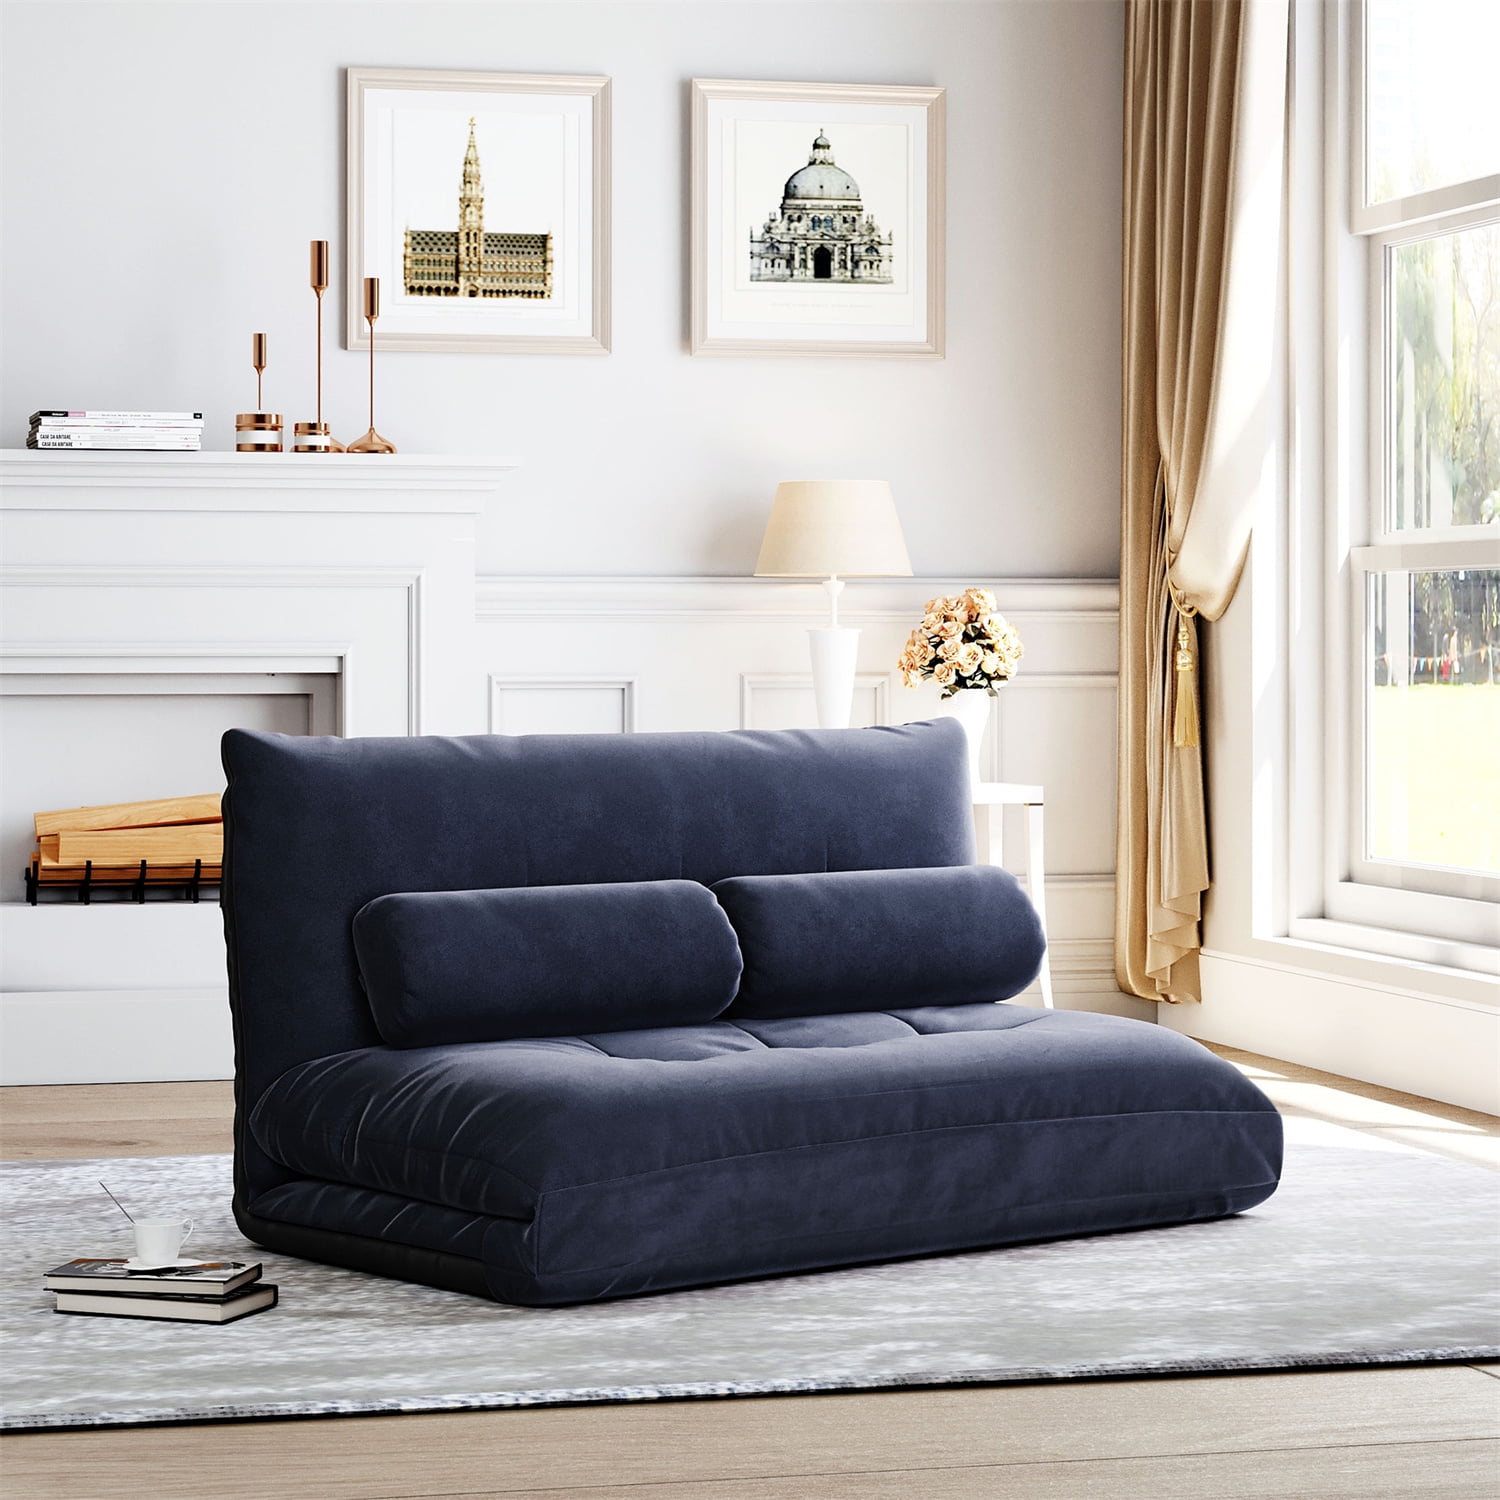 Lazy Sofa Floor Sofa, Futon Sofa Thicken Double Chaise, Folding Lounge Sleeper Sofa Bed Couch, Floor Gaming Couch, Cushioned with Two Pillows, Antique Navy - Walmart.com